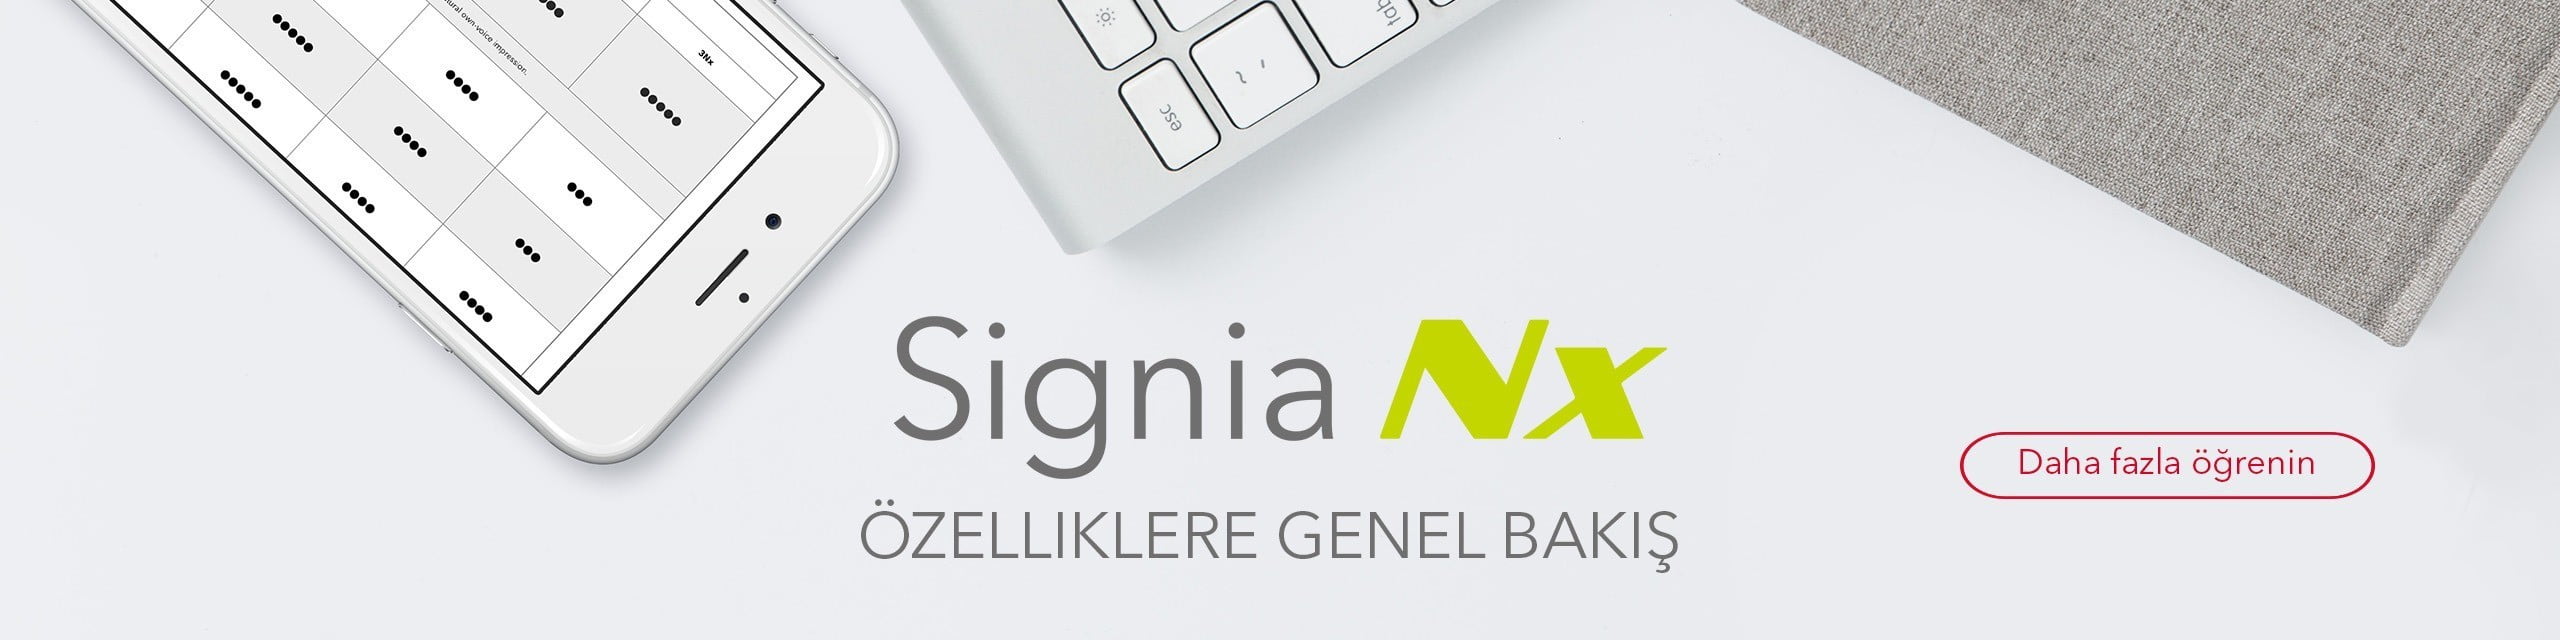 Signia NX TR ozellikler - Motion Charge Go